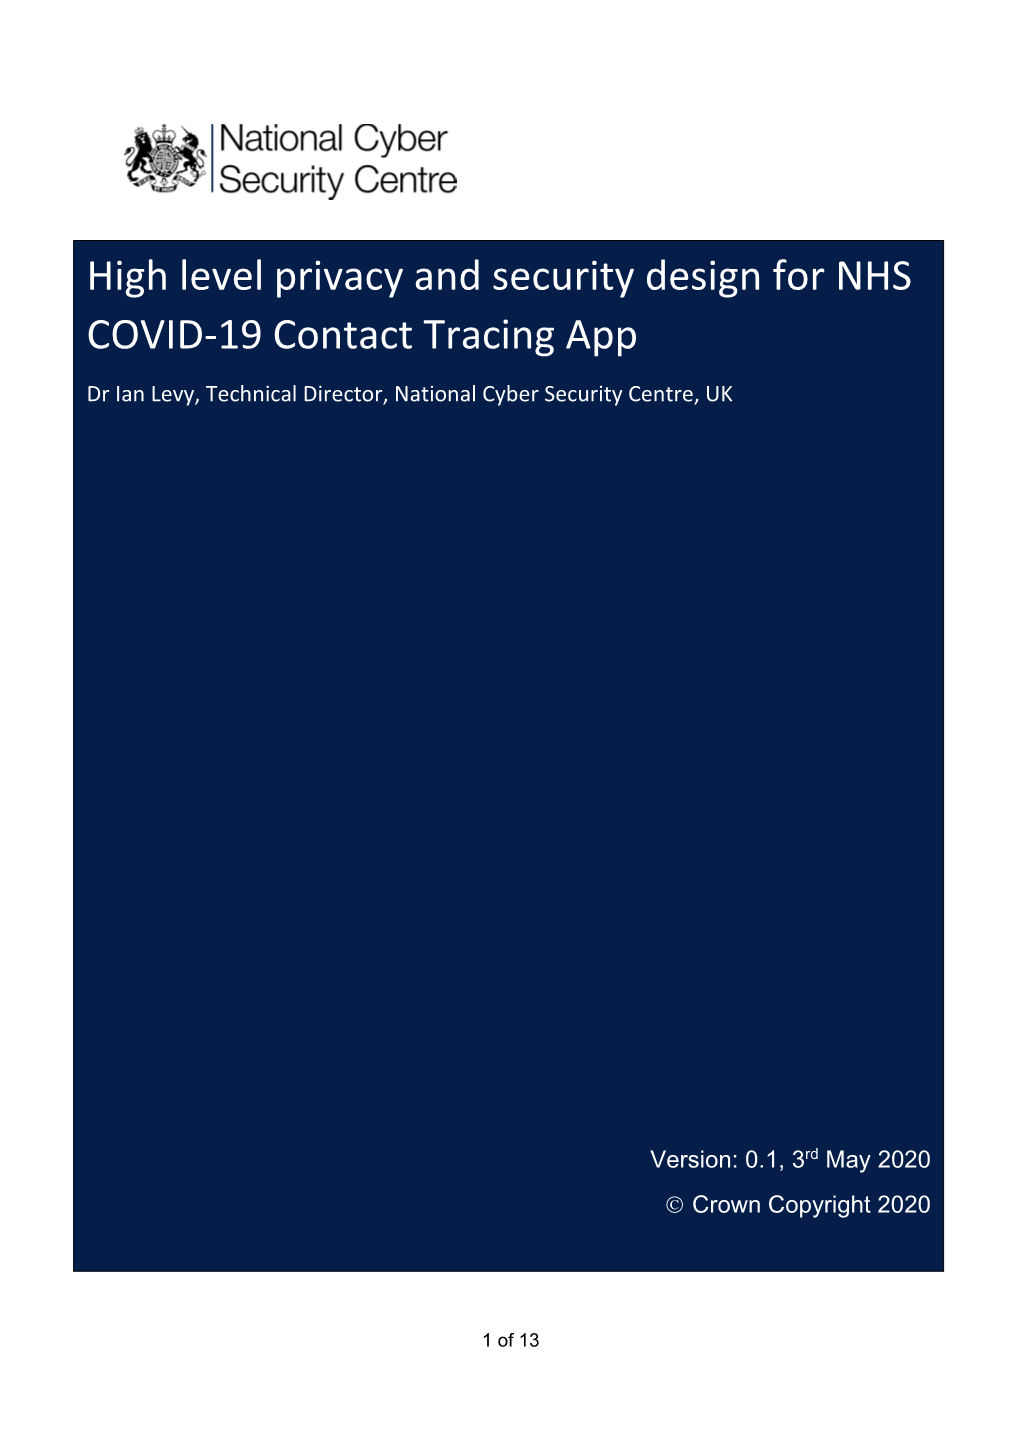 High Level Privacy and Security Design for NHS COVID-19 Contact Tracing App Dr Ian Levy, Technical Director, National Cyber Security Centre, UK